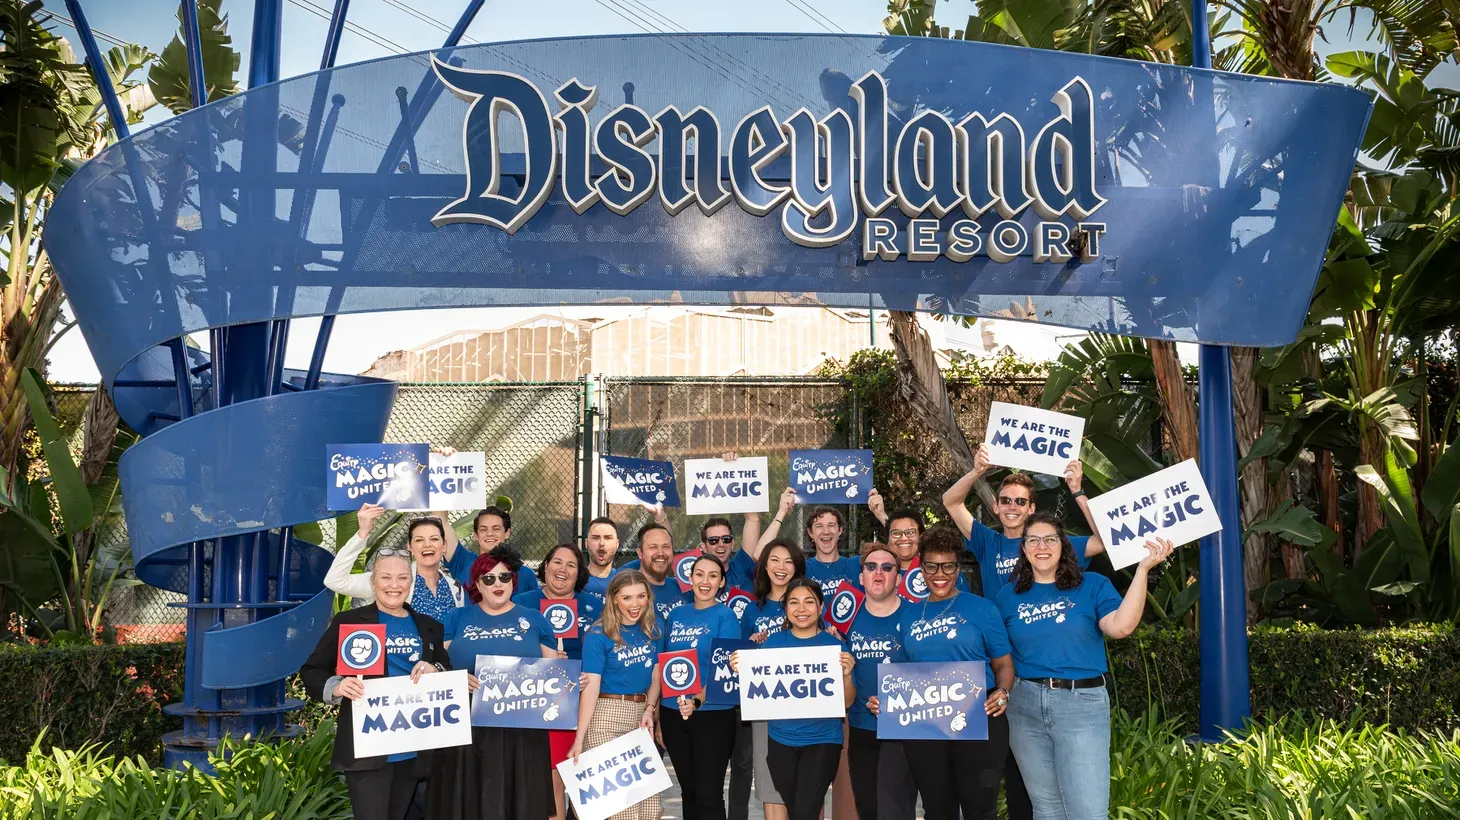 Disneyland Resort characters voted to unionize with the Actors’ Equity Association this month. The character actors at Walt Disney World Resort in Orlando have been organized with the Teamsters since the 1980s.